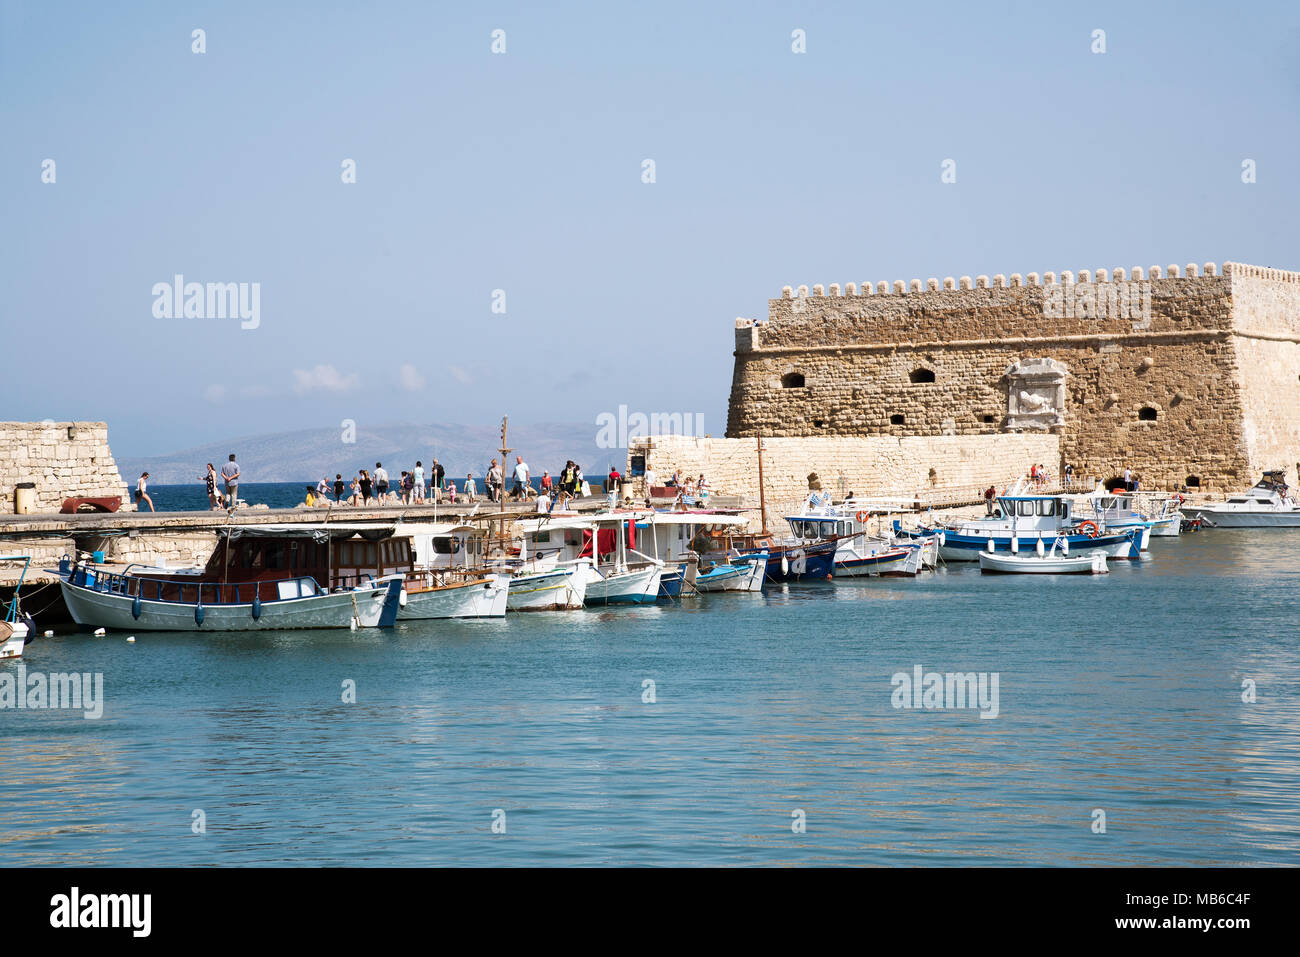 Venetian Fortress on the harbour at Heraklion, Crete, Greece. 2017 Stock Photo